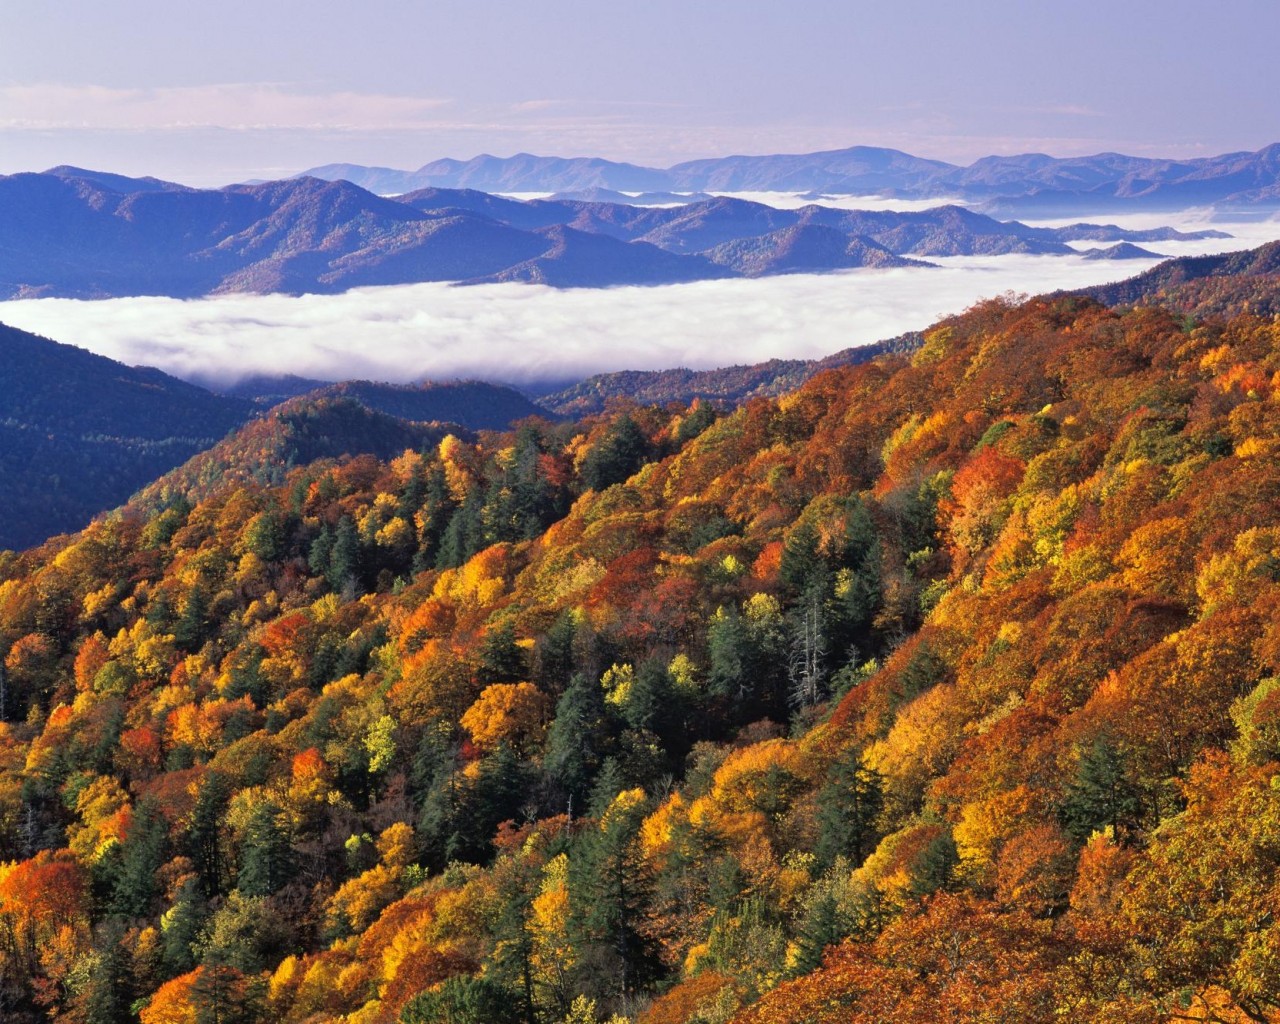  Smoky Mountains National Park North Carolina in 1280x1024 resolution 1280x1024